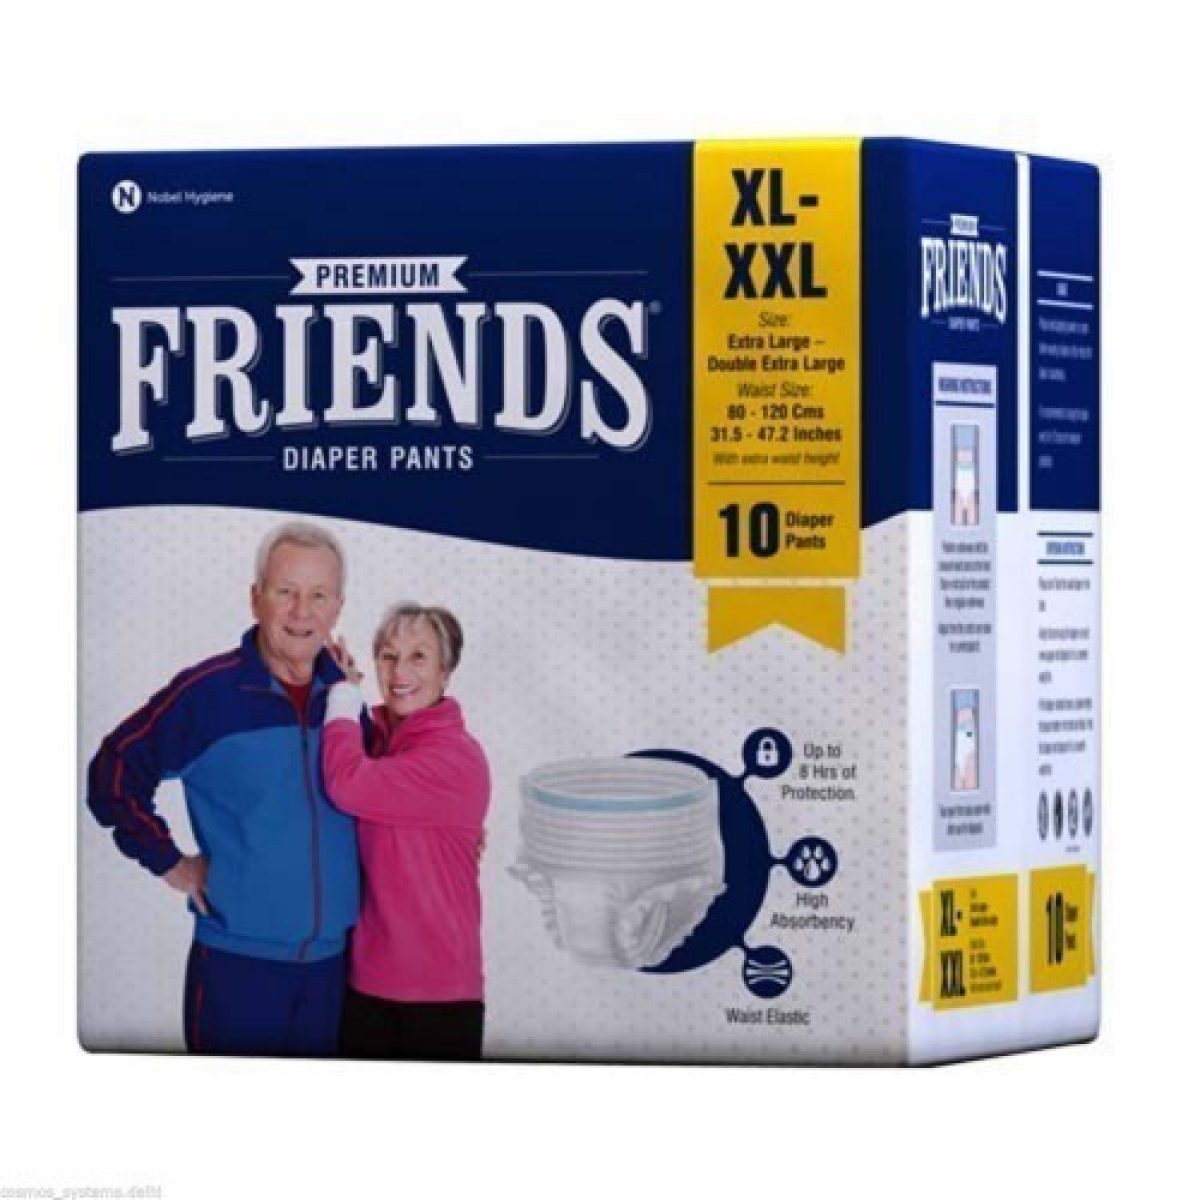 Buy Friends Premium Adult Diaper Pants Extra Large size Waist 30-56 in,  High Absorbency Anti-Bacterial Core, 10s PACK at lowest price | Dotage Store